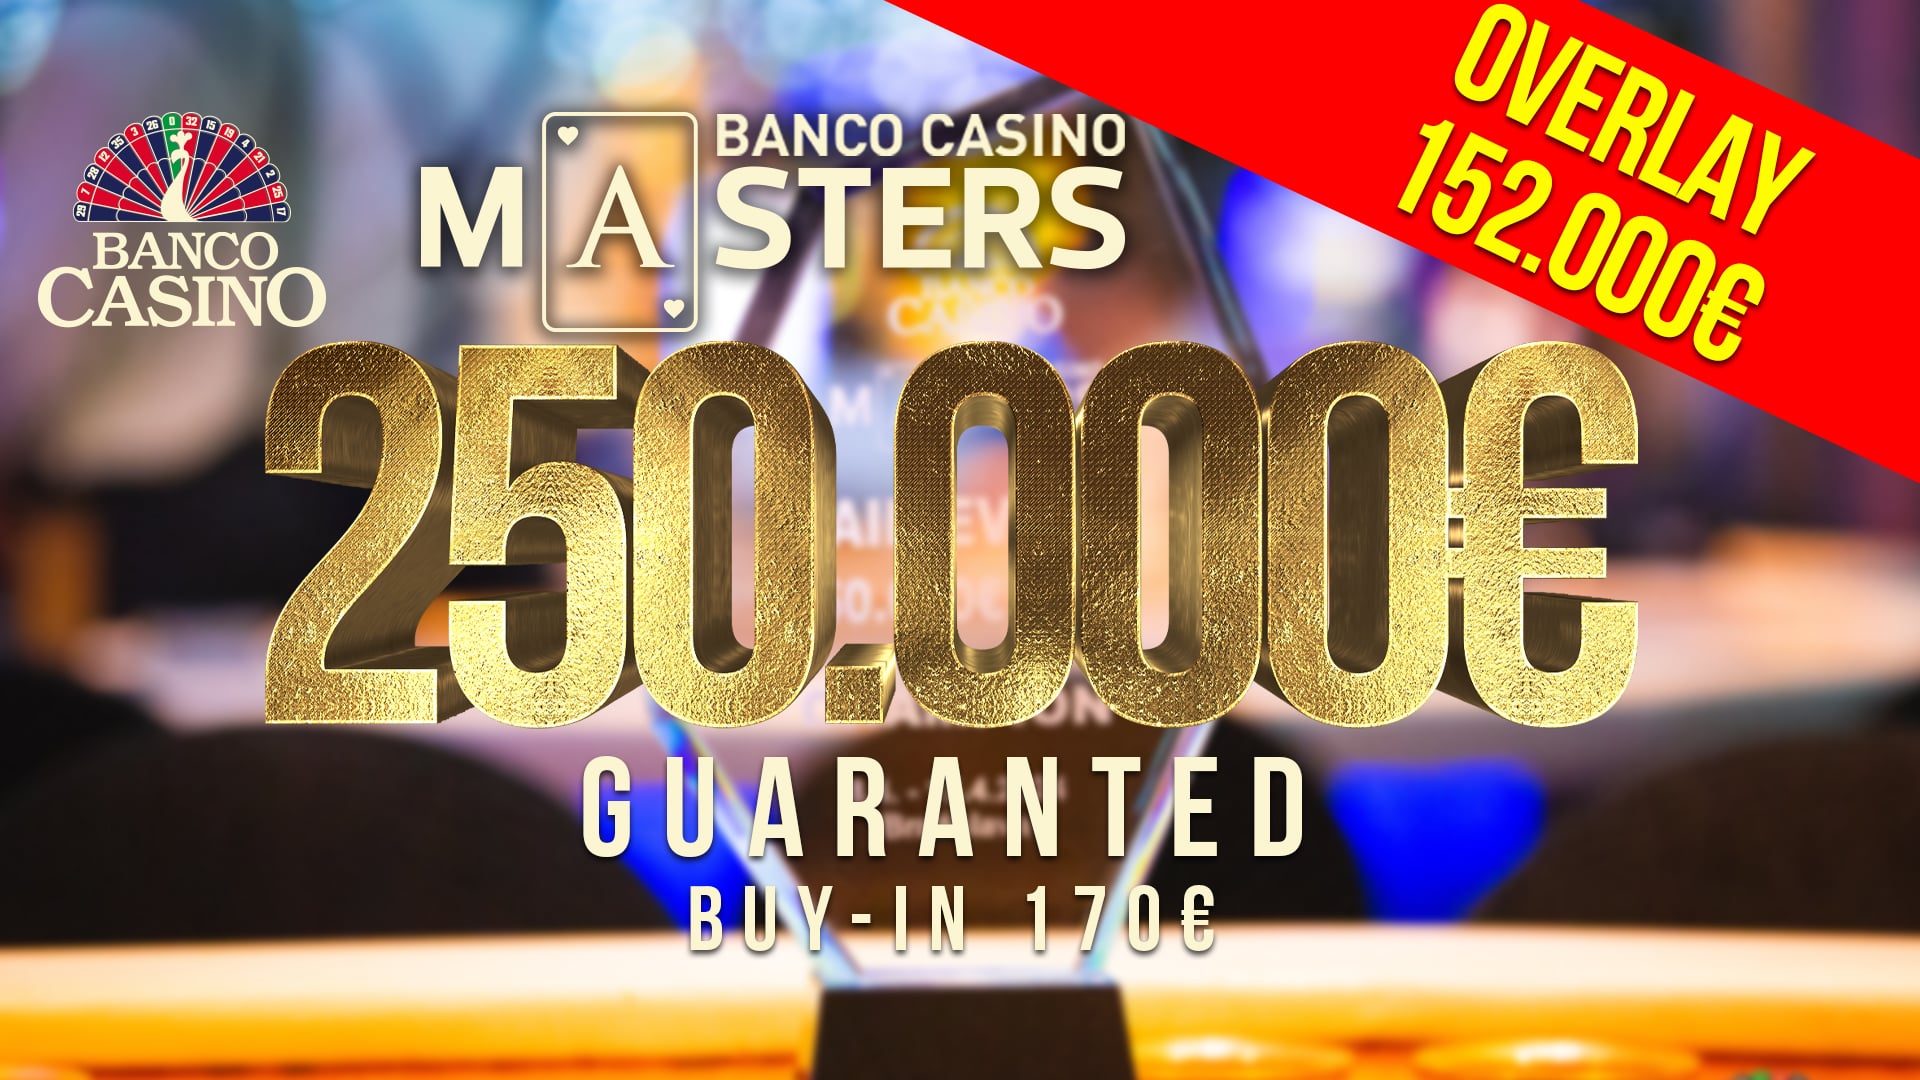 BANCO CASINO MASTERS €250,000 GTD – CURRENT OVERLAY 152,000€!